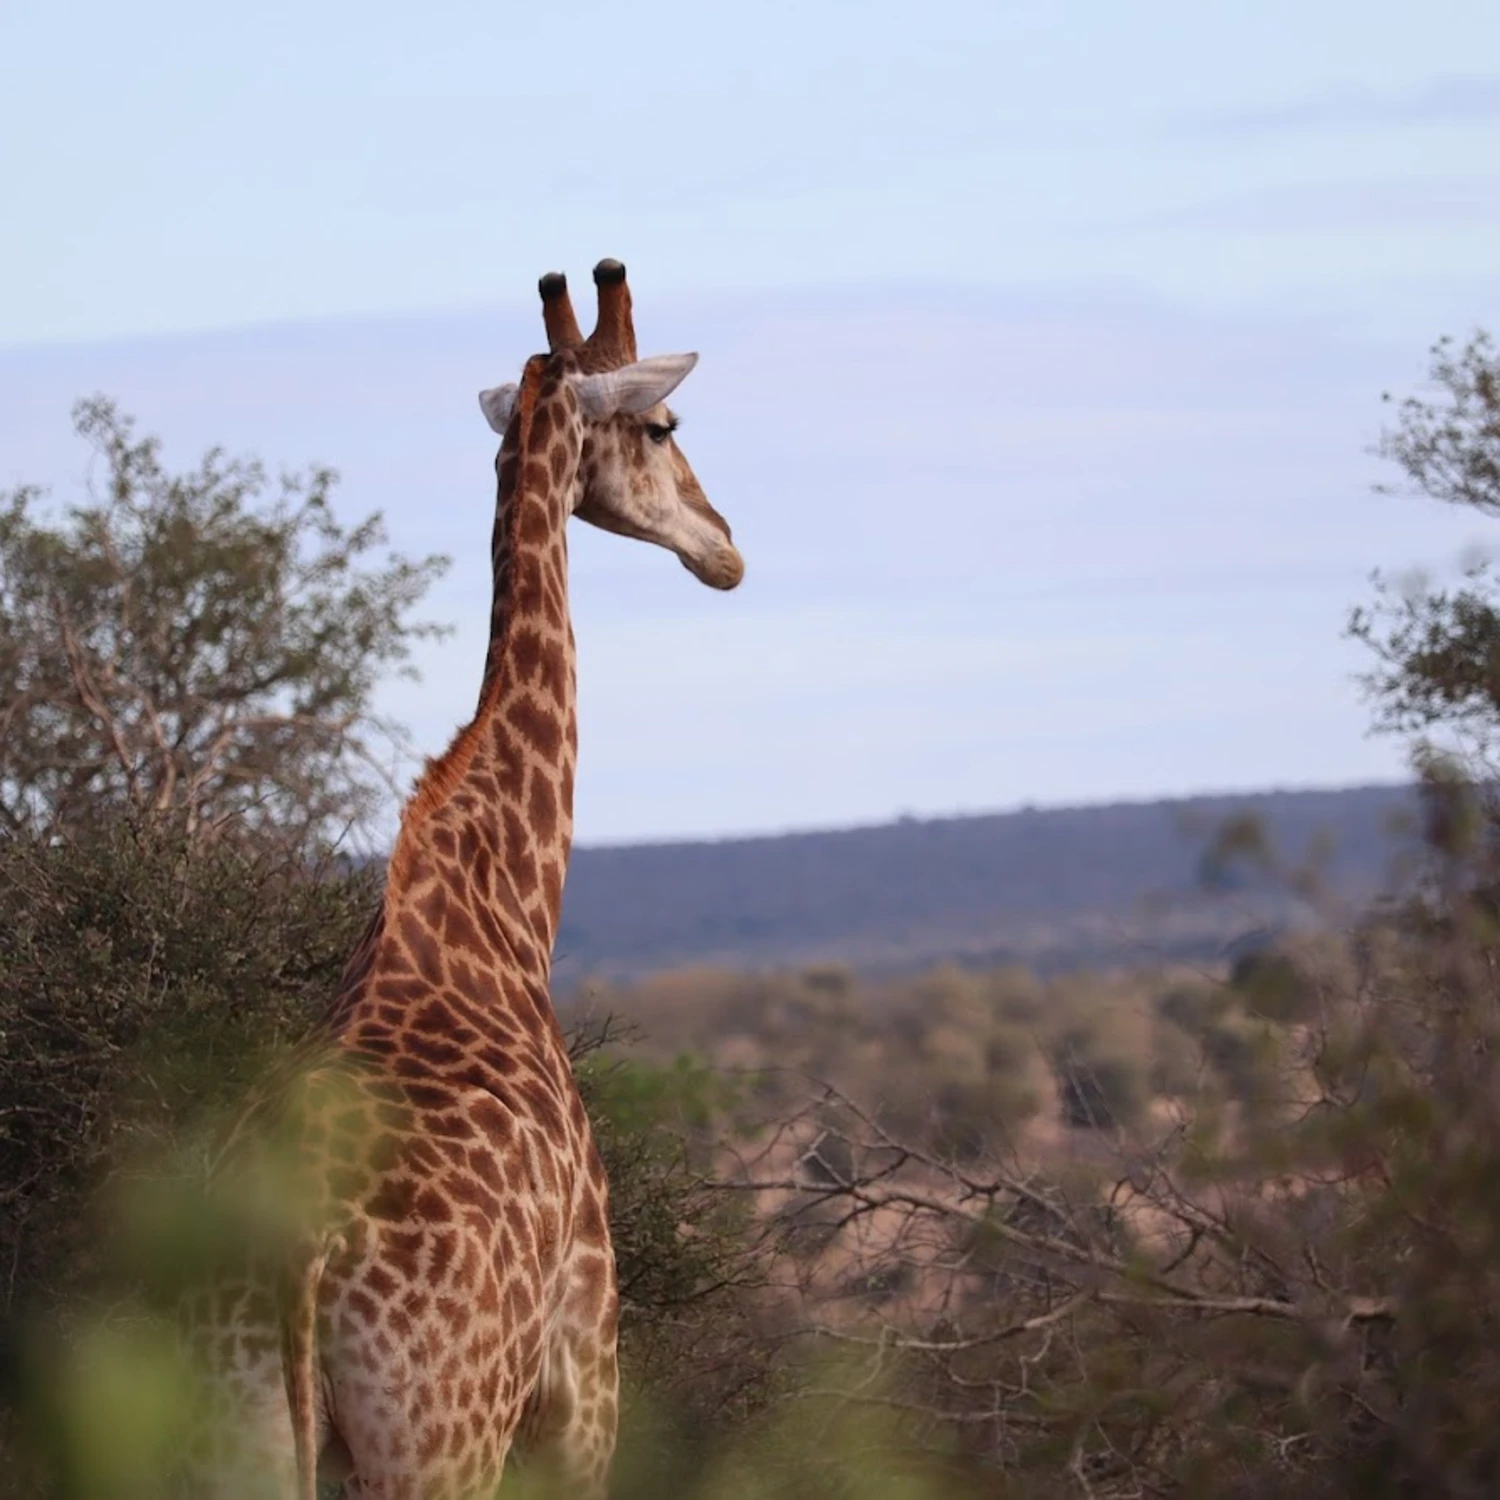 View of a giraffe and a valley